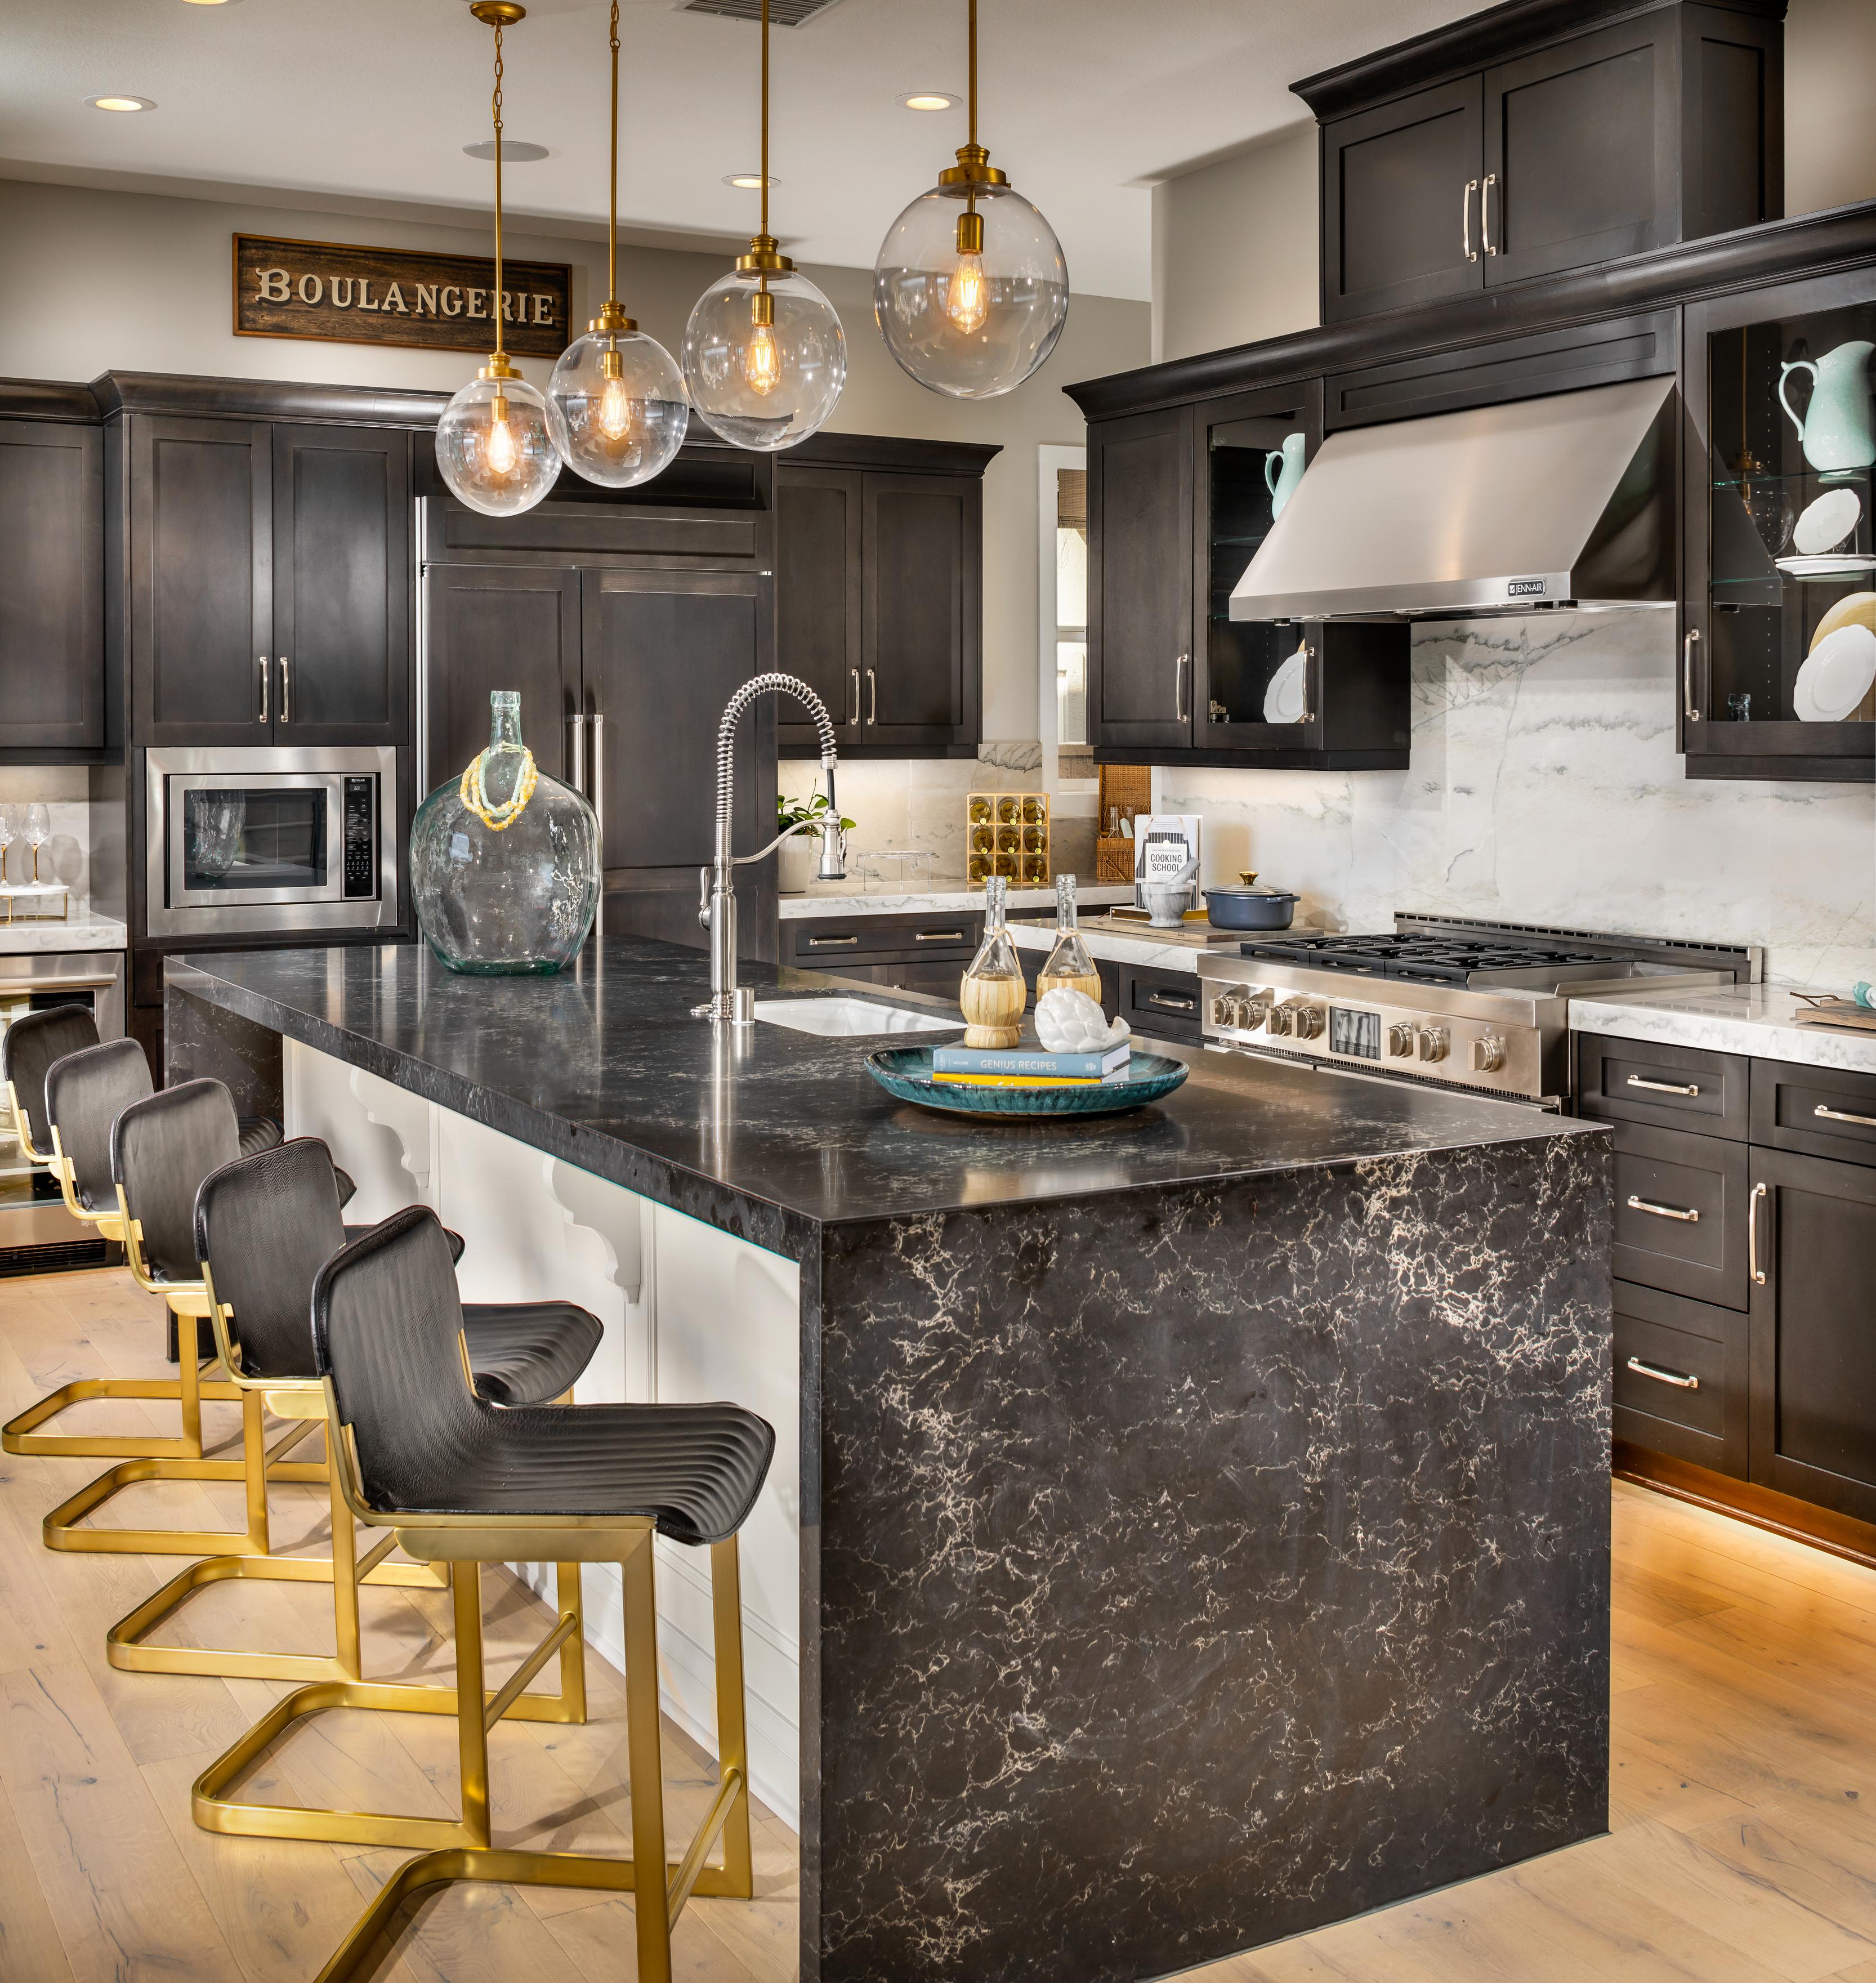 25 Luxury Kitchen Ideas for Your Dream Home | Build Beautiful